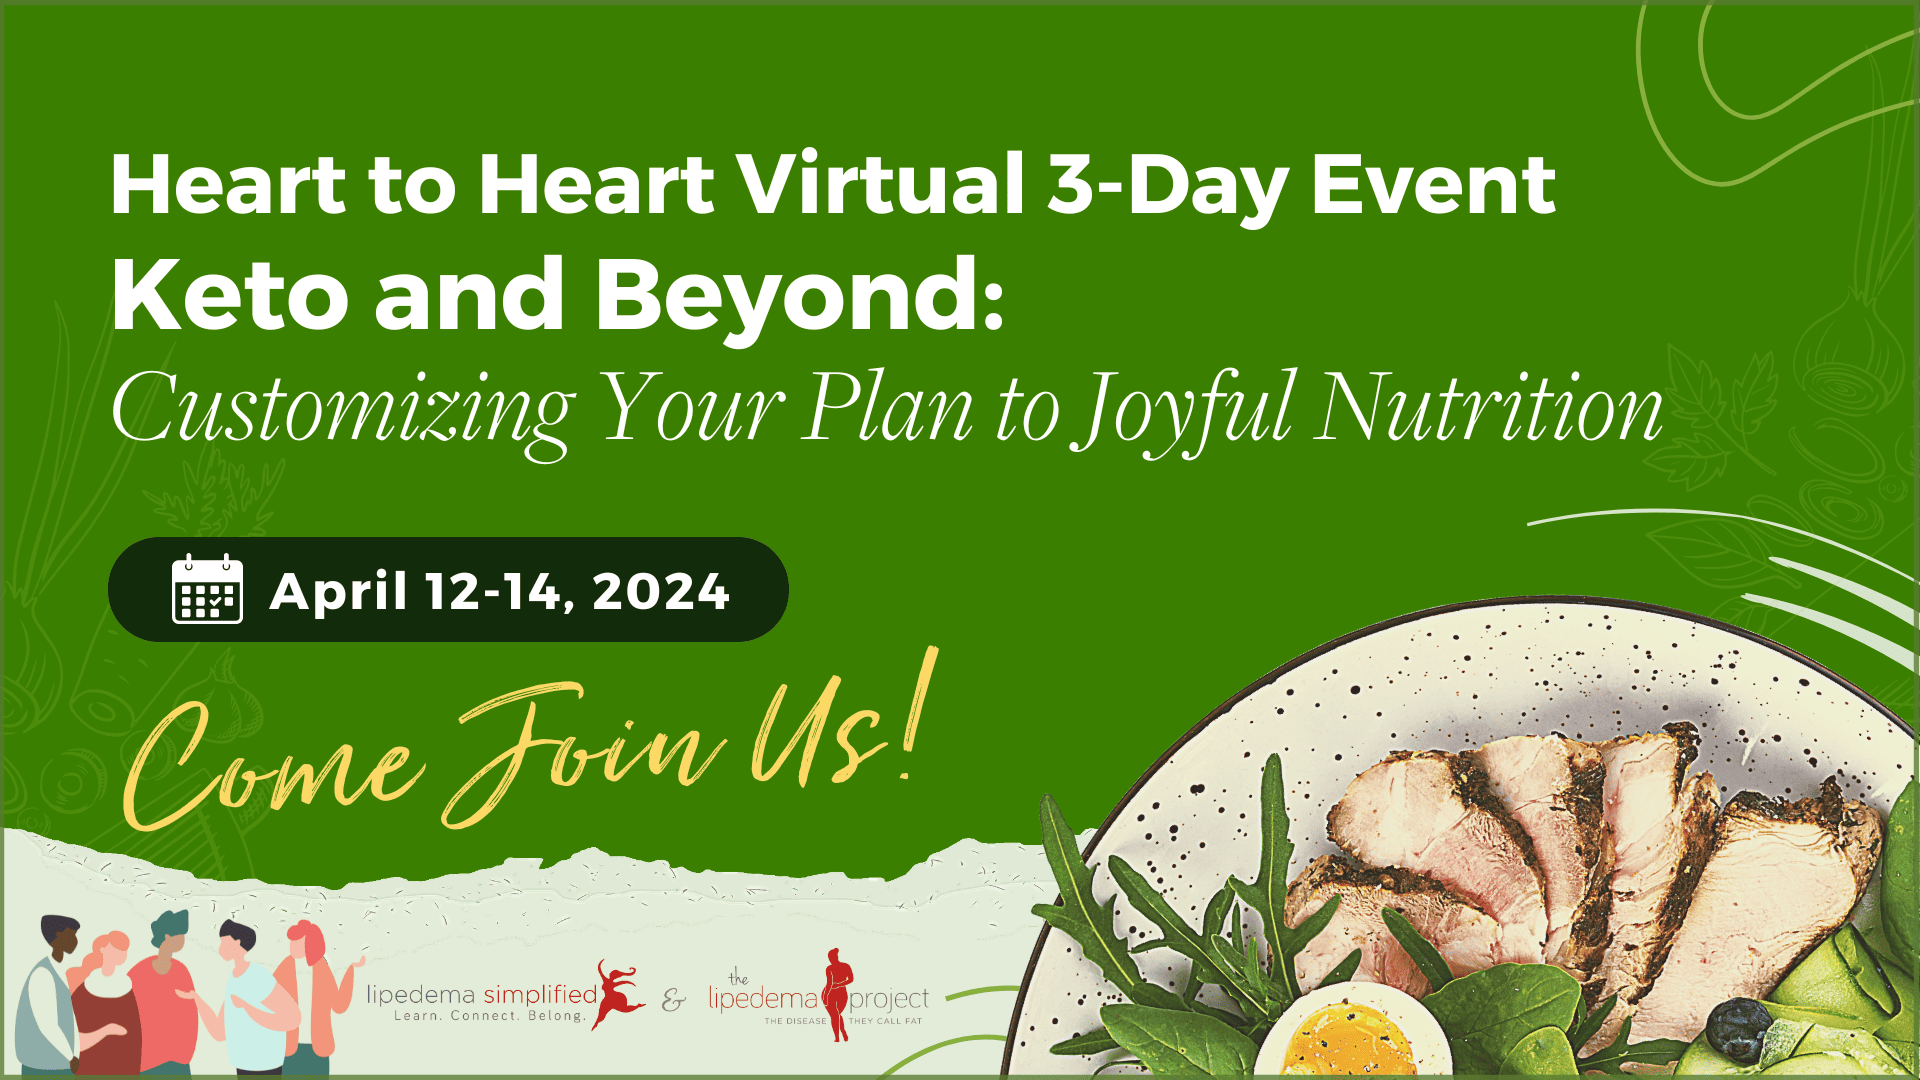 Heart to Heart Virtual 3-Day Event Keto and Beyond: Customizing Your Plan to Joyful Nutrition Official Image